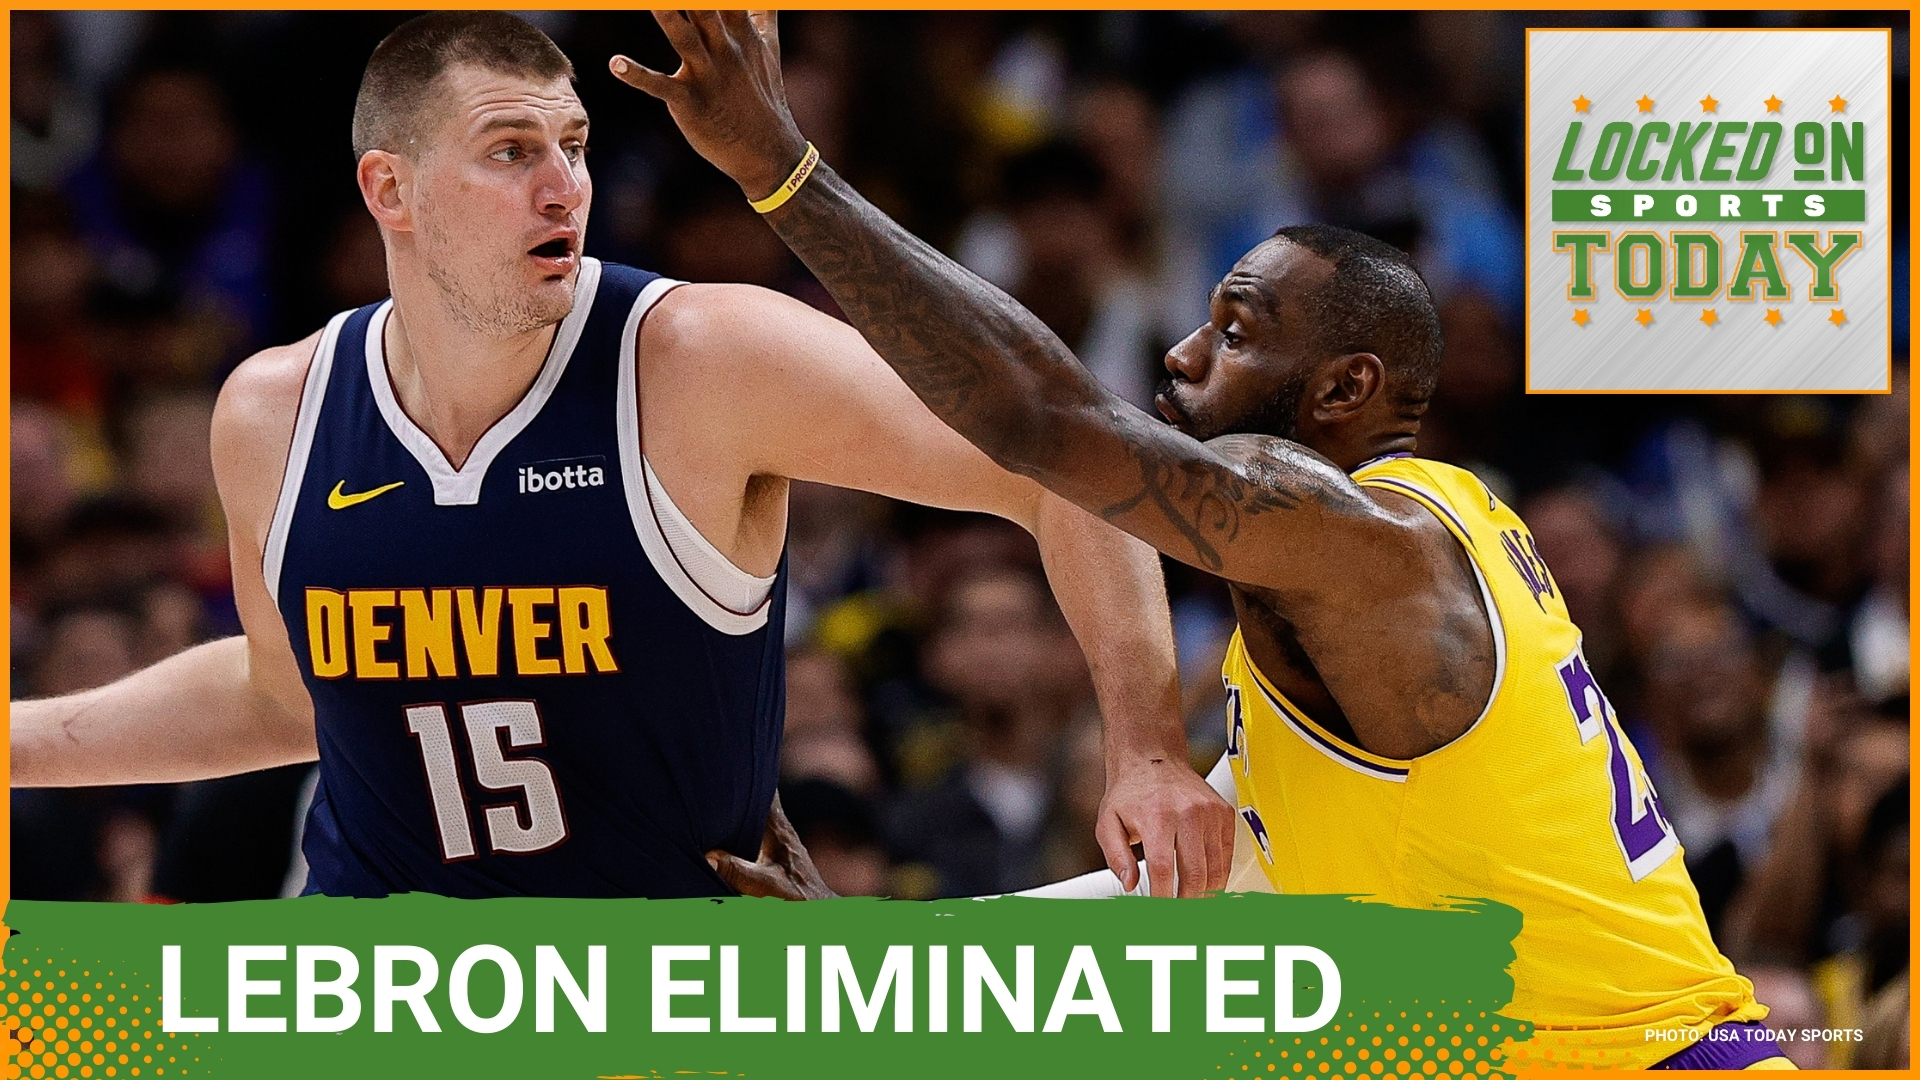 The Denver Nuggets eliminated Lebron James and the Los Angeles Lakers for the second straight season in the NBA Playoffs.